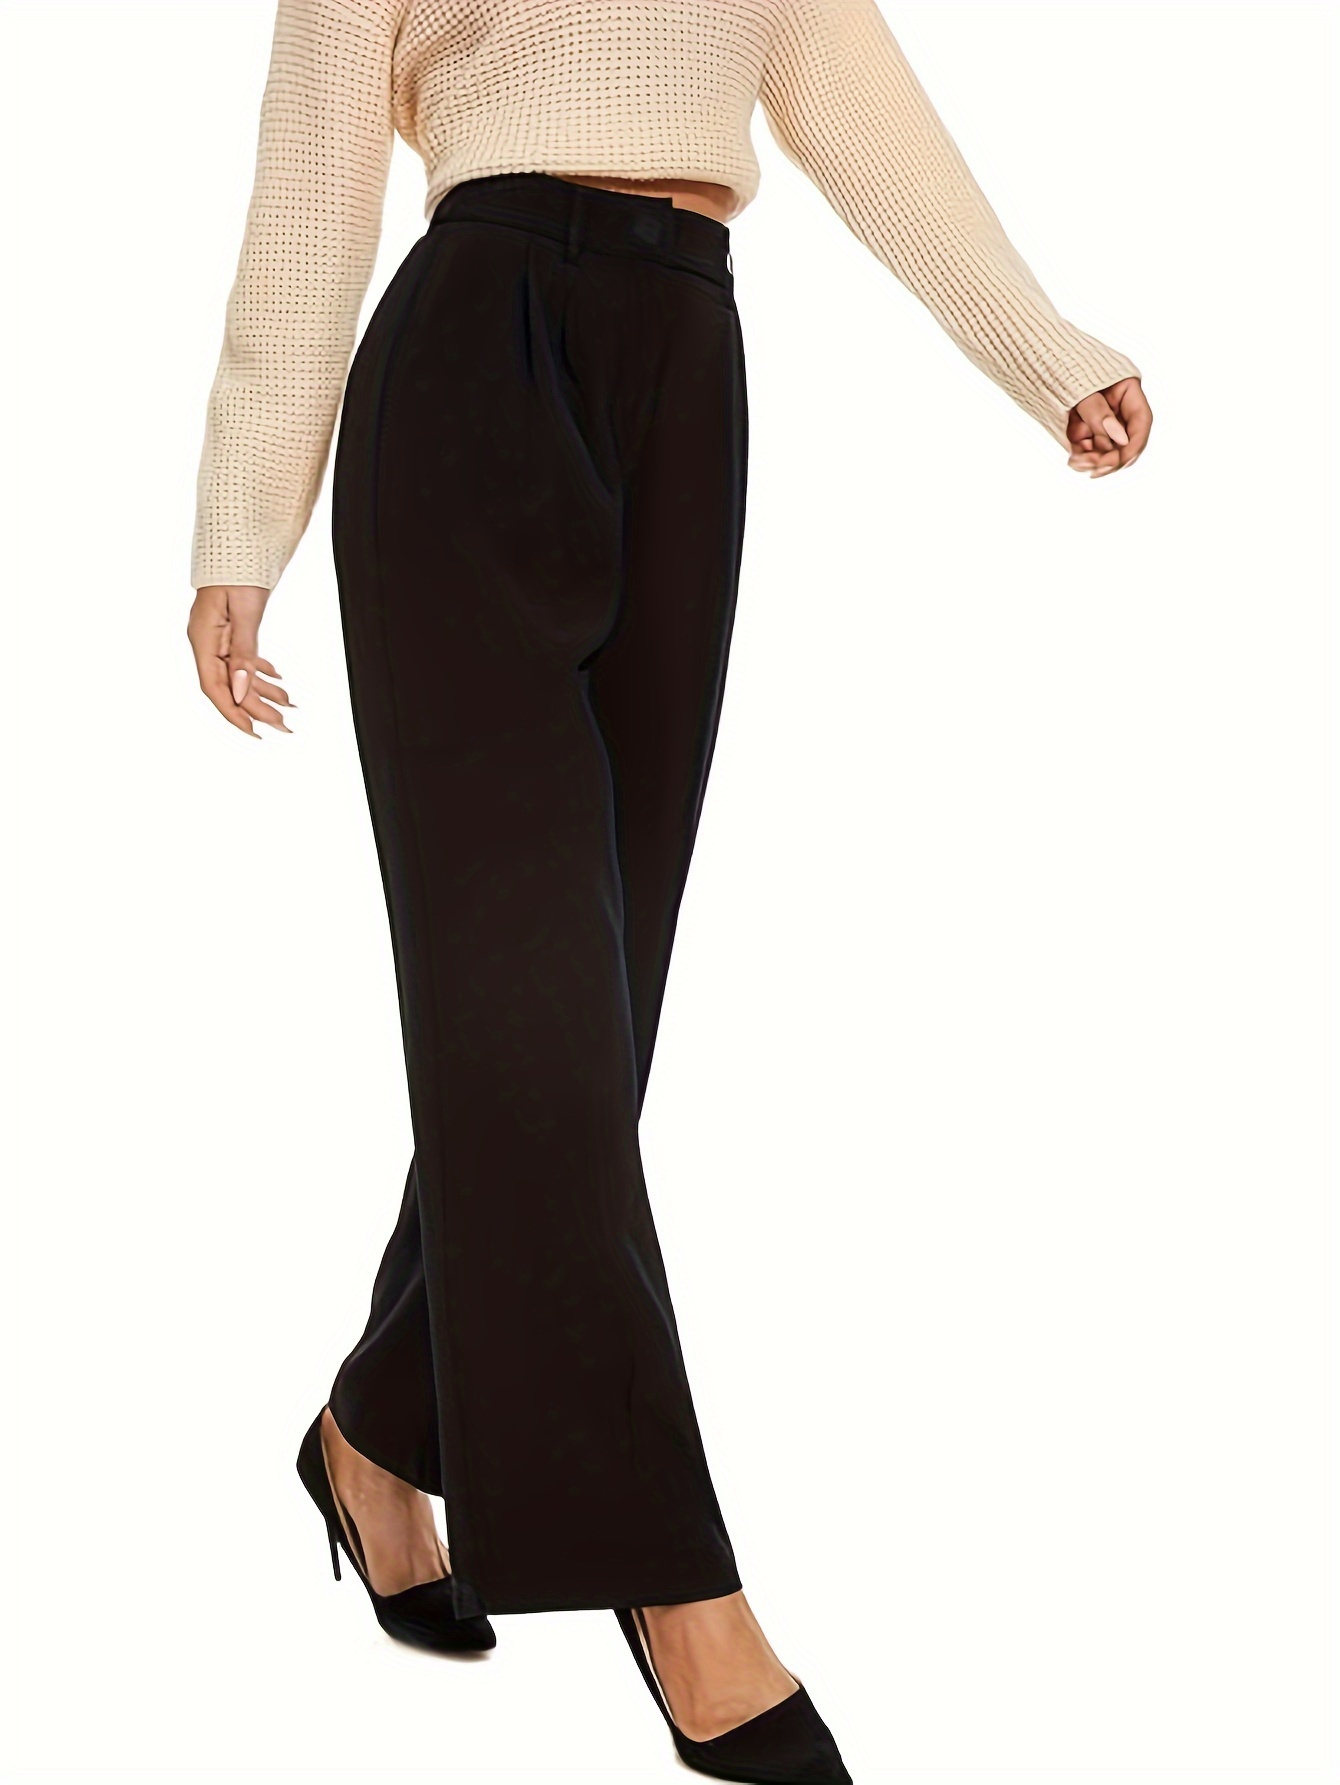 Womens High Waist Straight Legs Pants Formal Dress Suit Long Loose Trousers